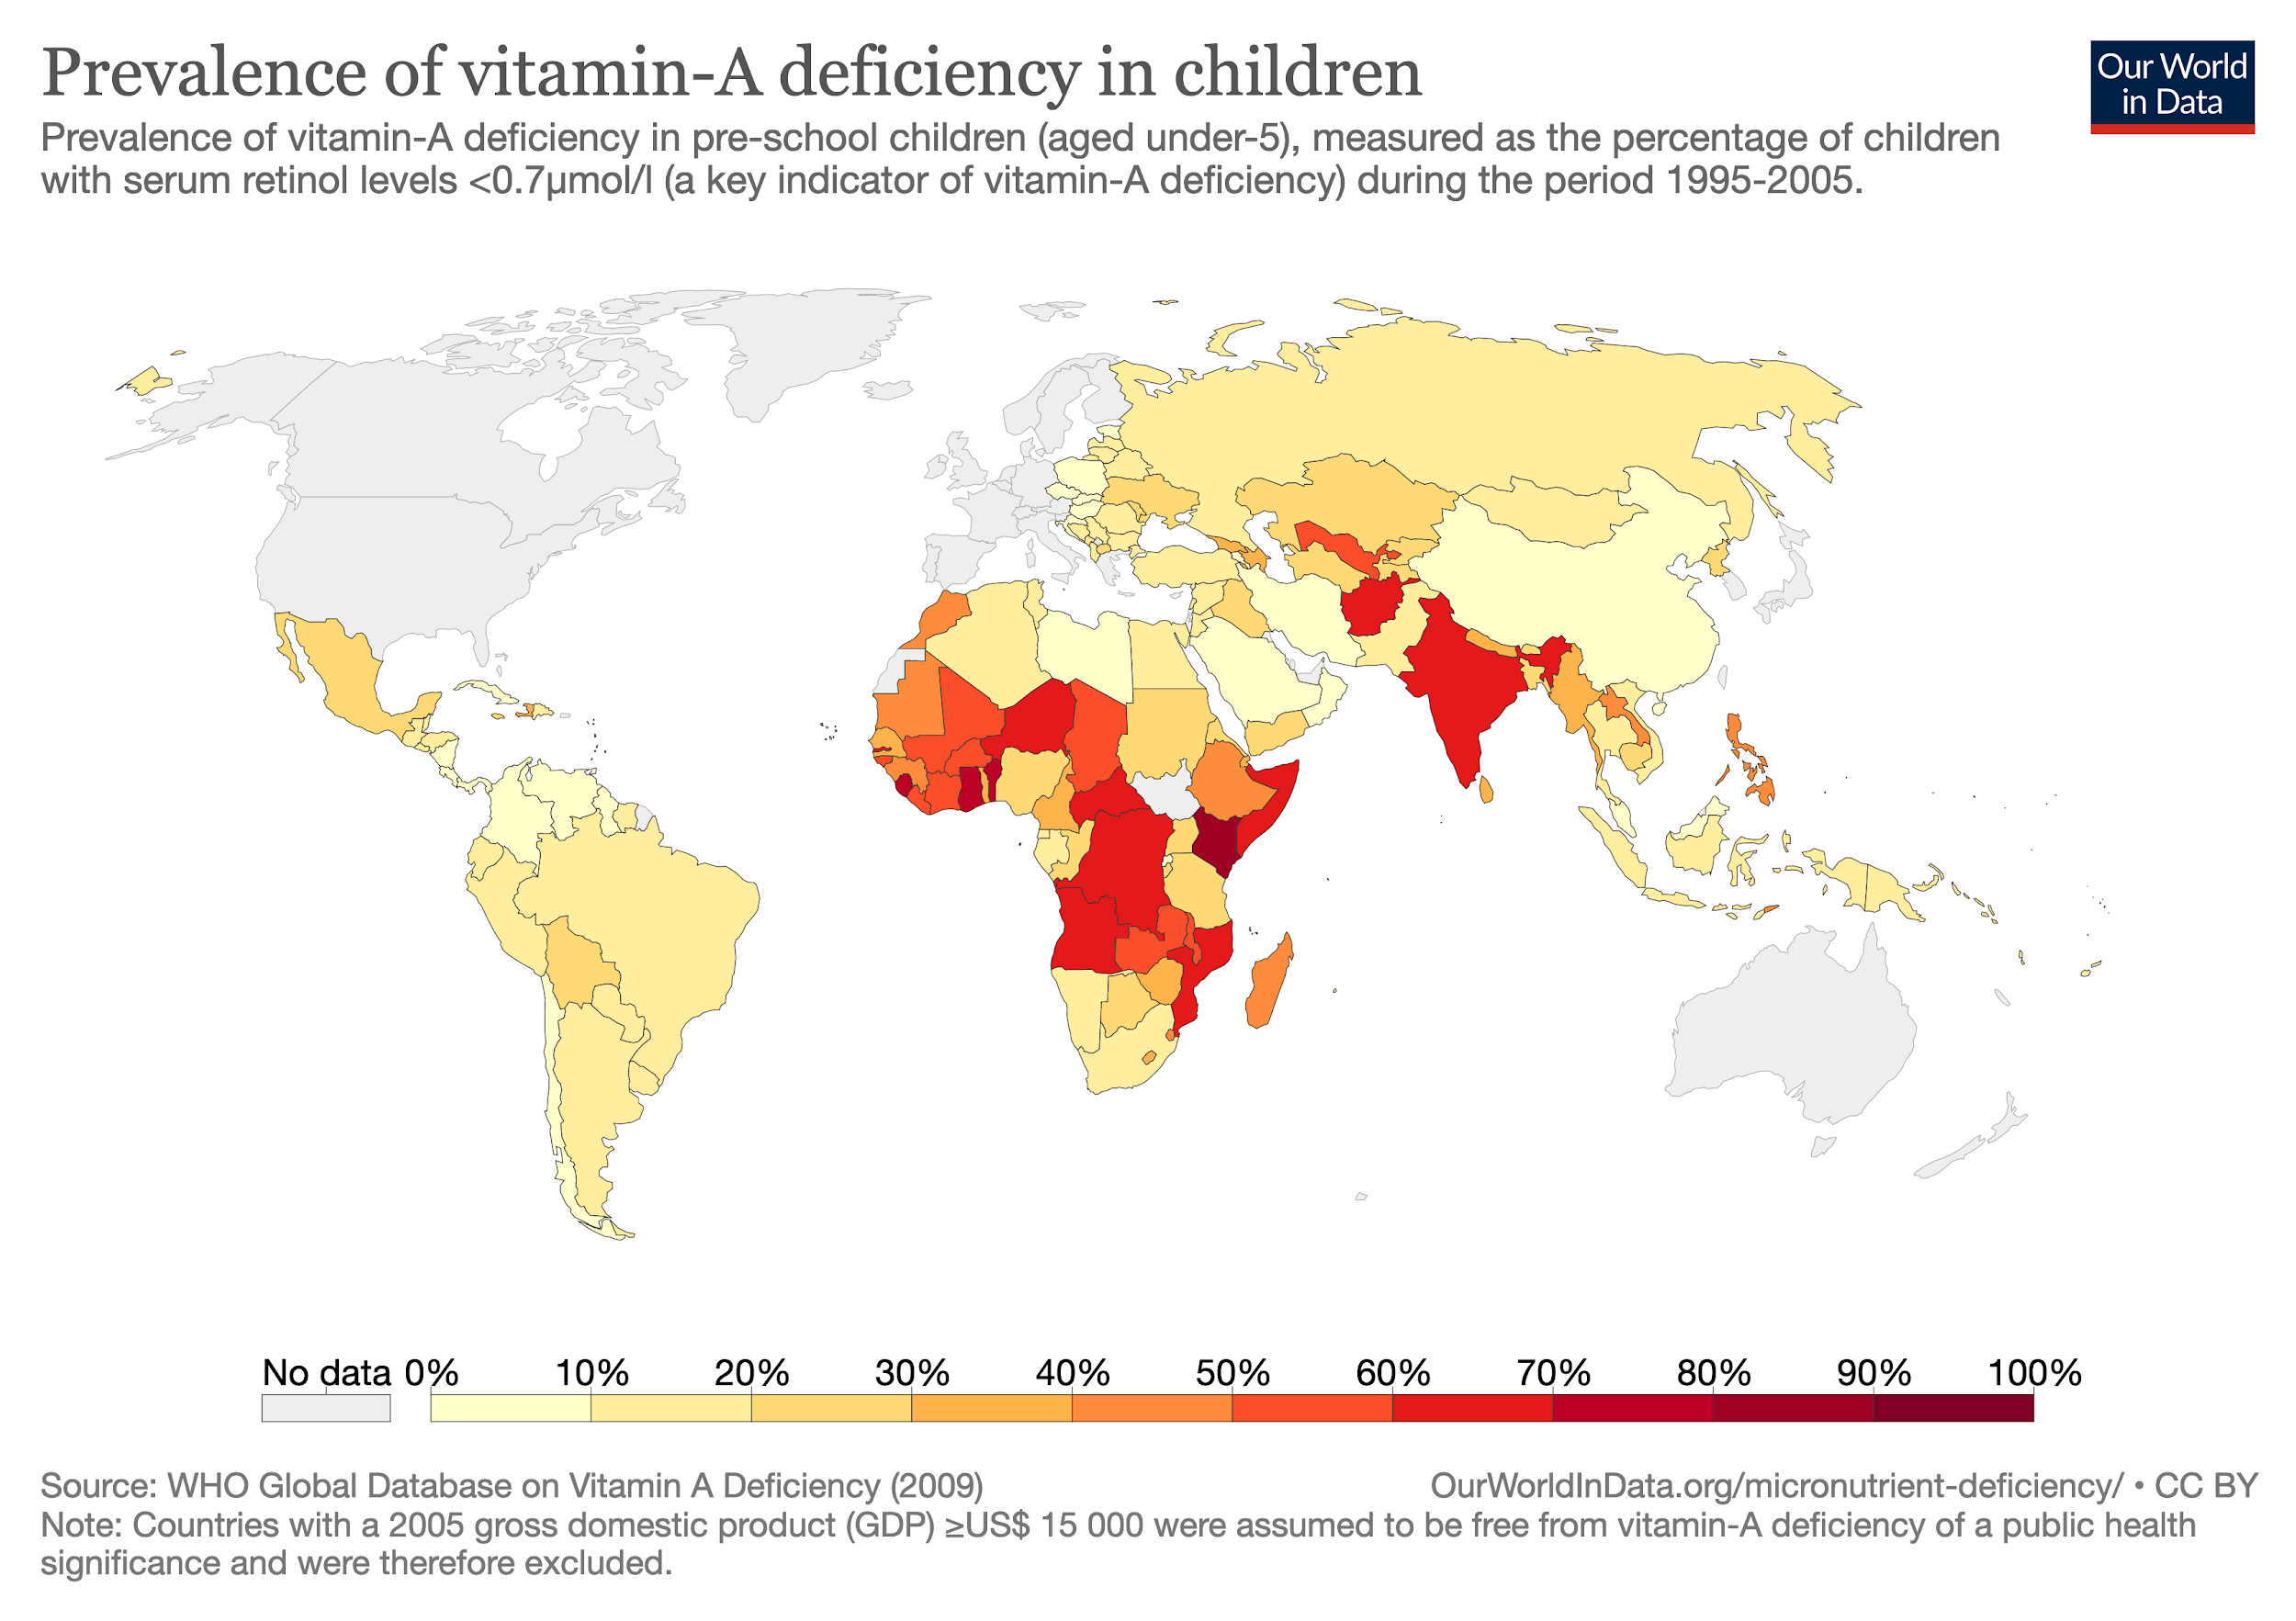 A world map shows the prevalence of vitamin A deficiency in children, using shades of yellow, orange, and red to indicate higher prevalence. The map shows that countries in south Asia and sub-Saharan Africa have the highest prevalence.